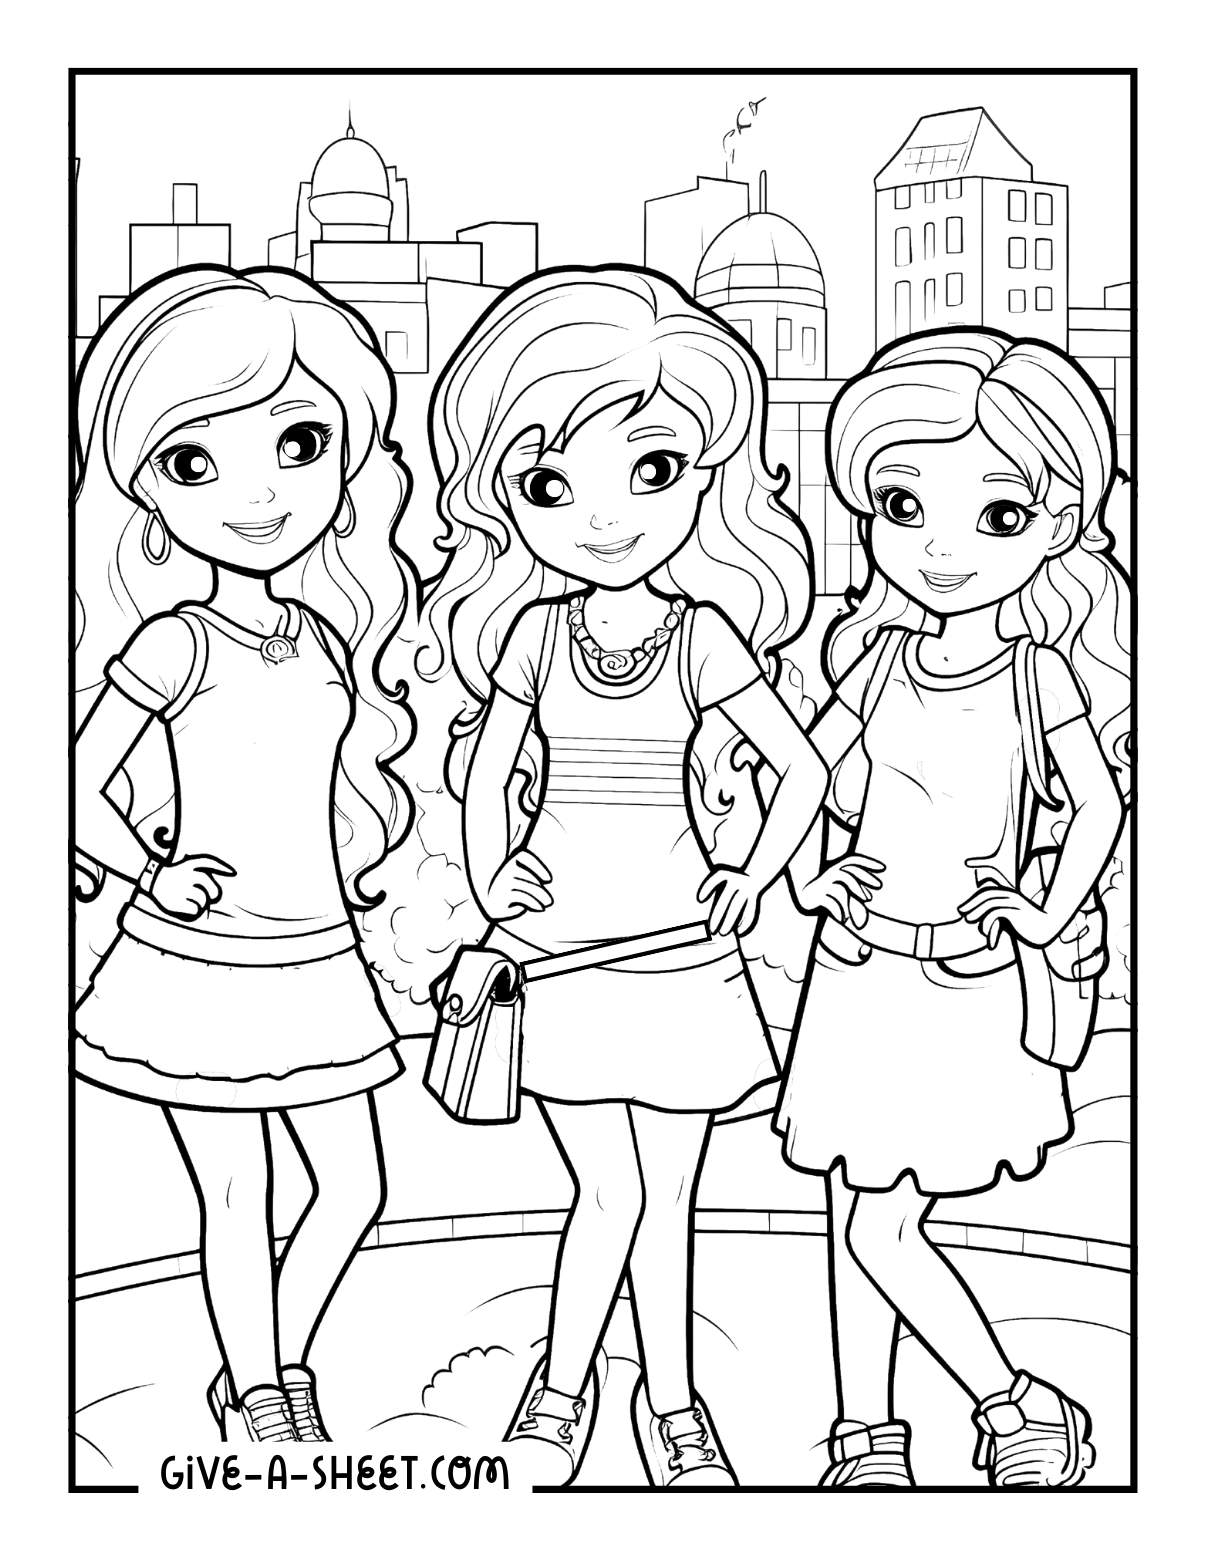 Cute girls 3 bff coloring pages for teenagers.